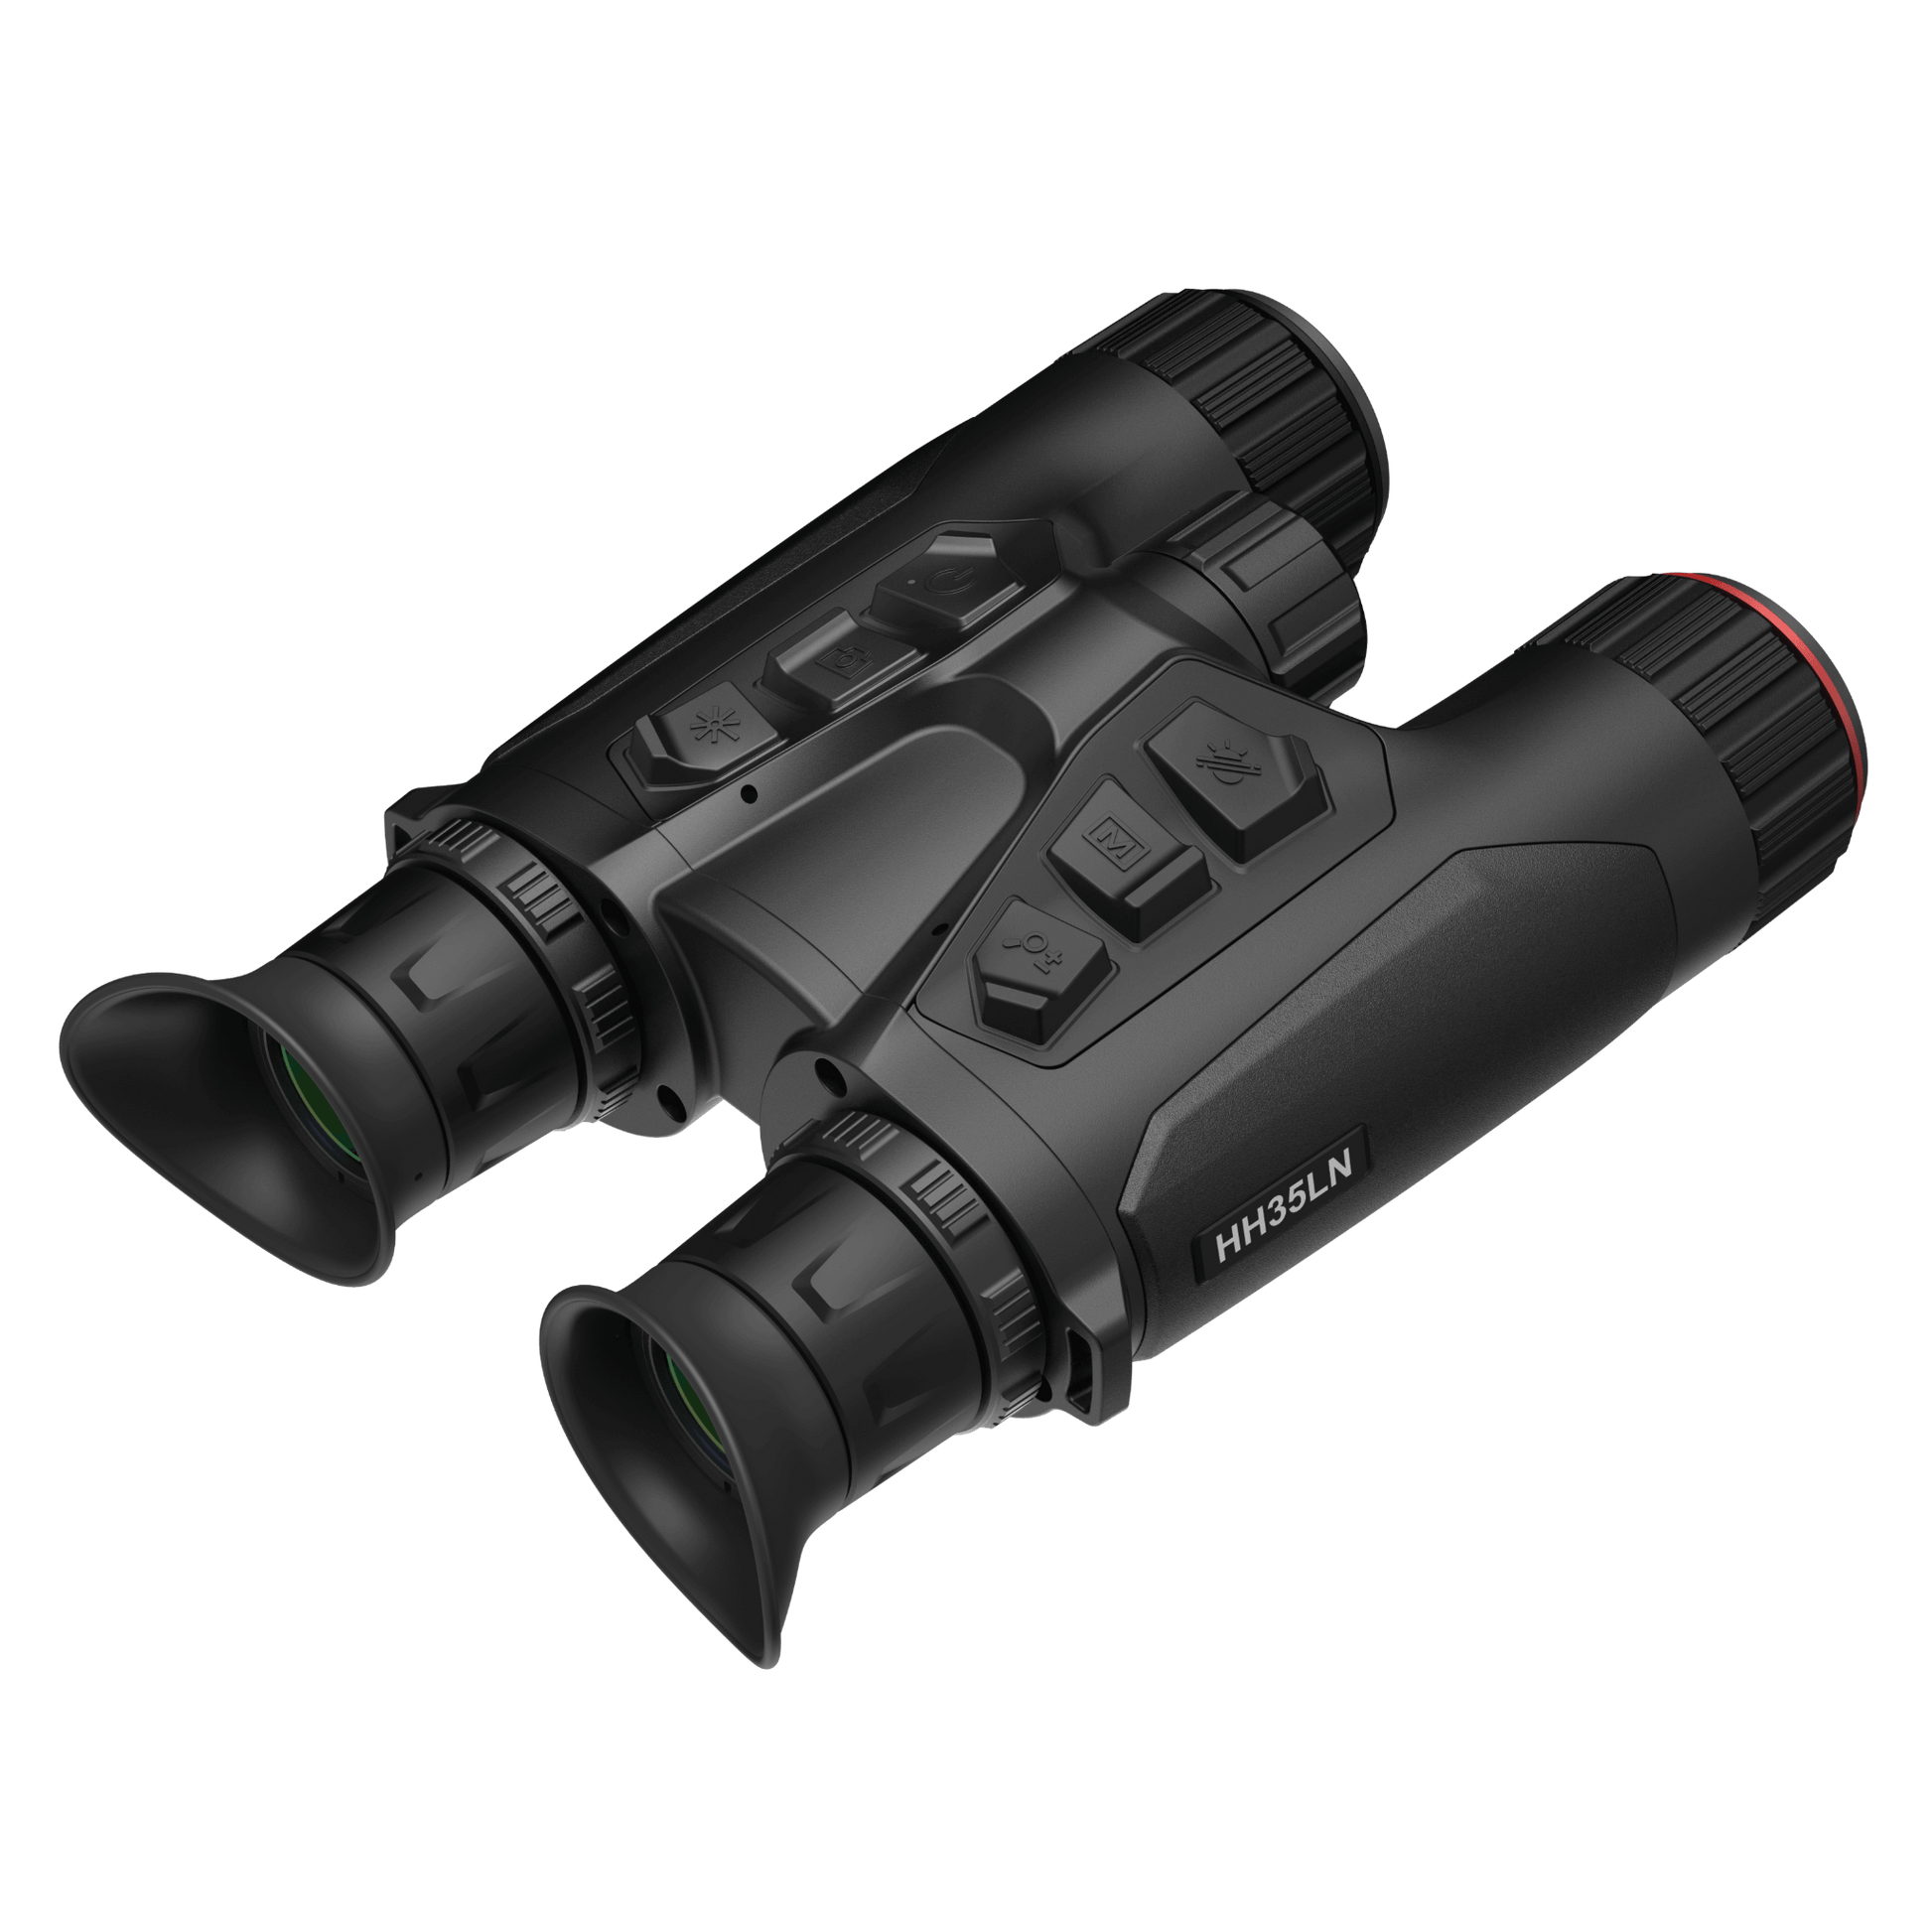 HikMicro Habrok HH35LN Multi-Spectrum Binoculars with Thermal Imaging - Rear Right View